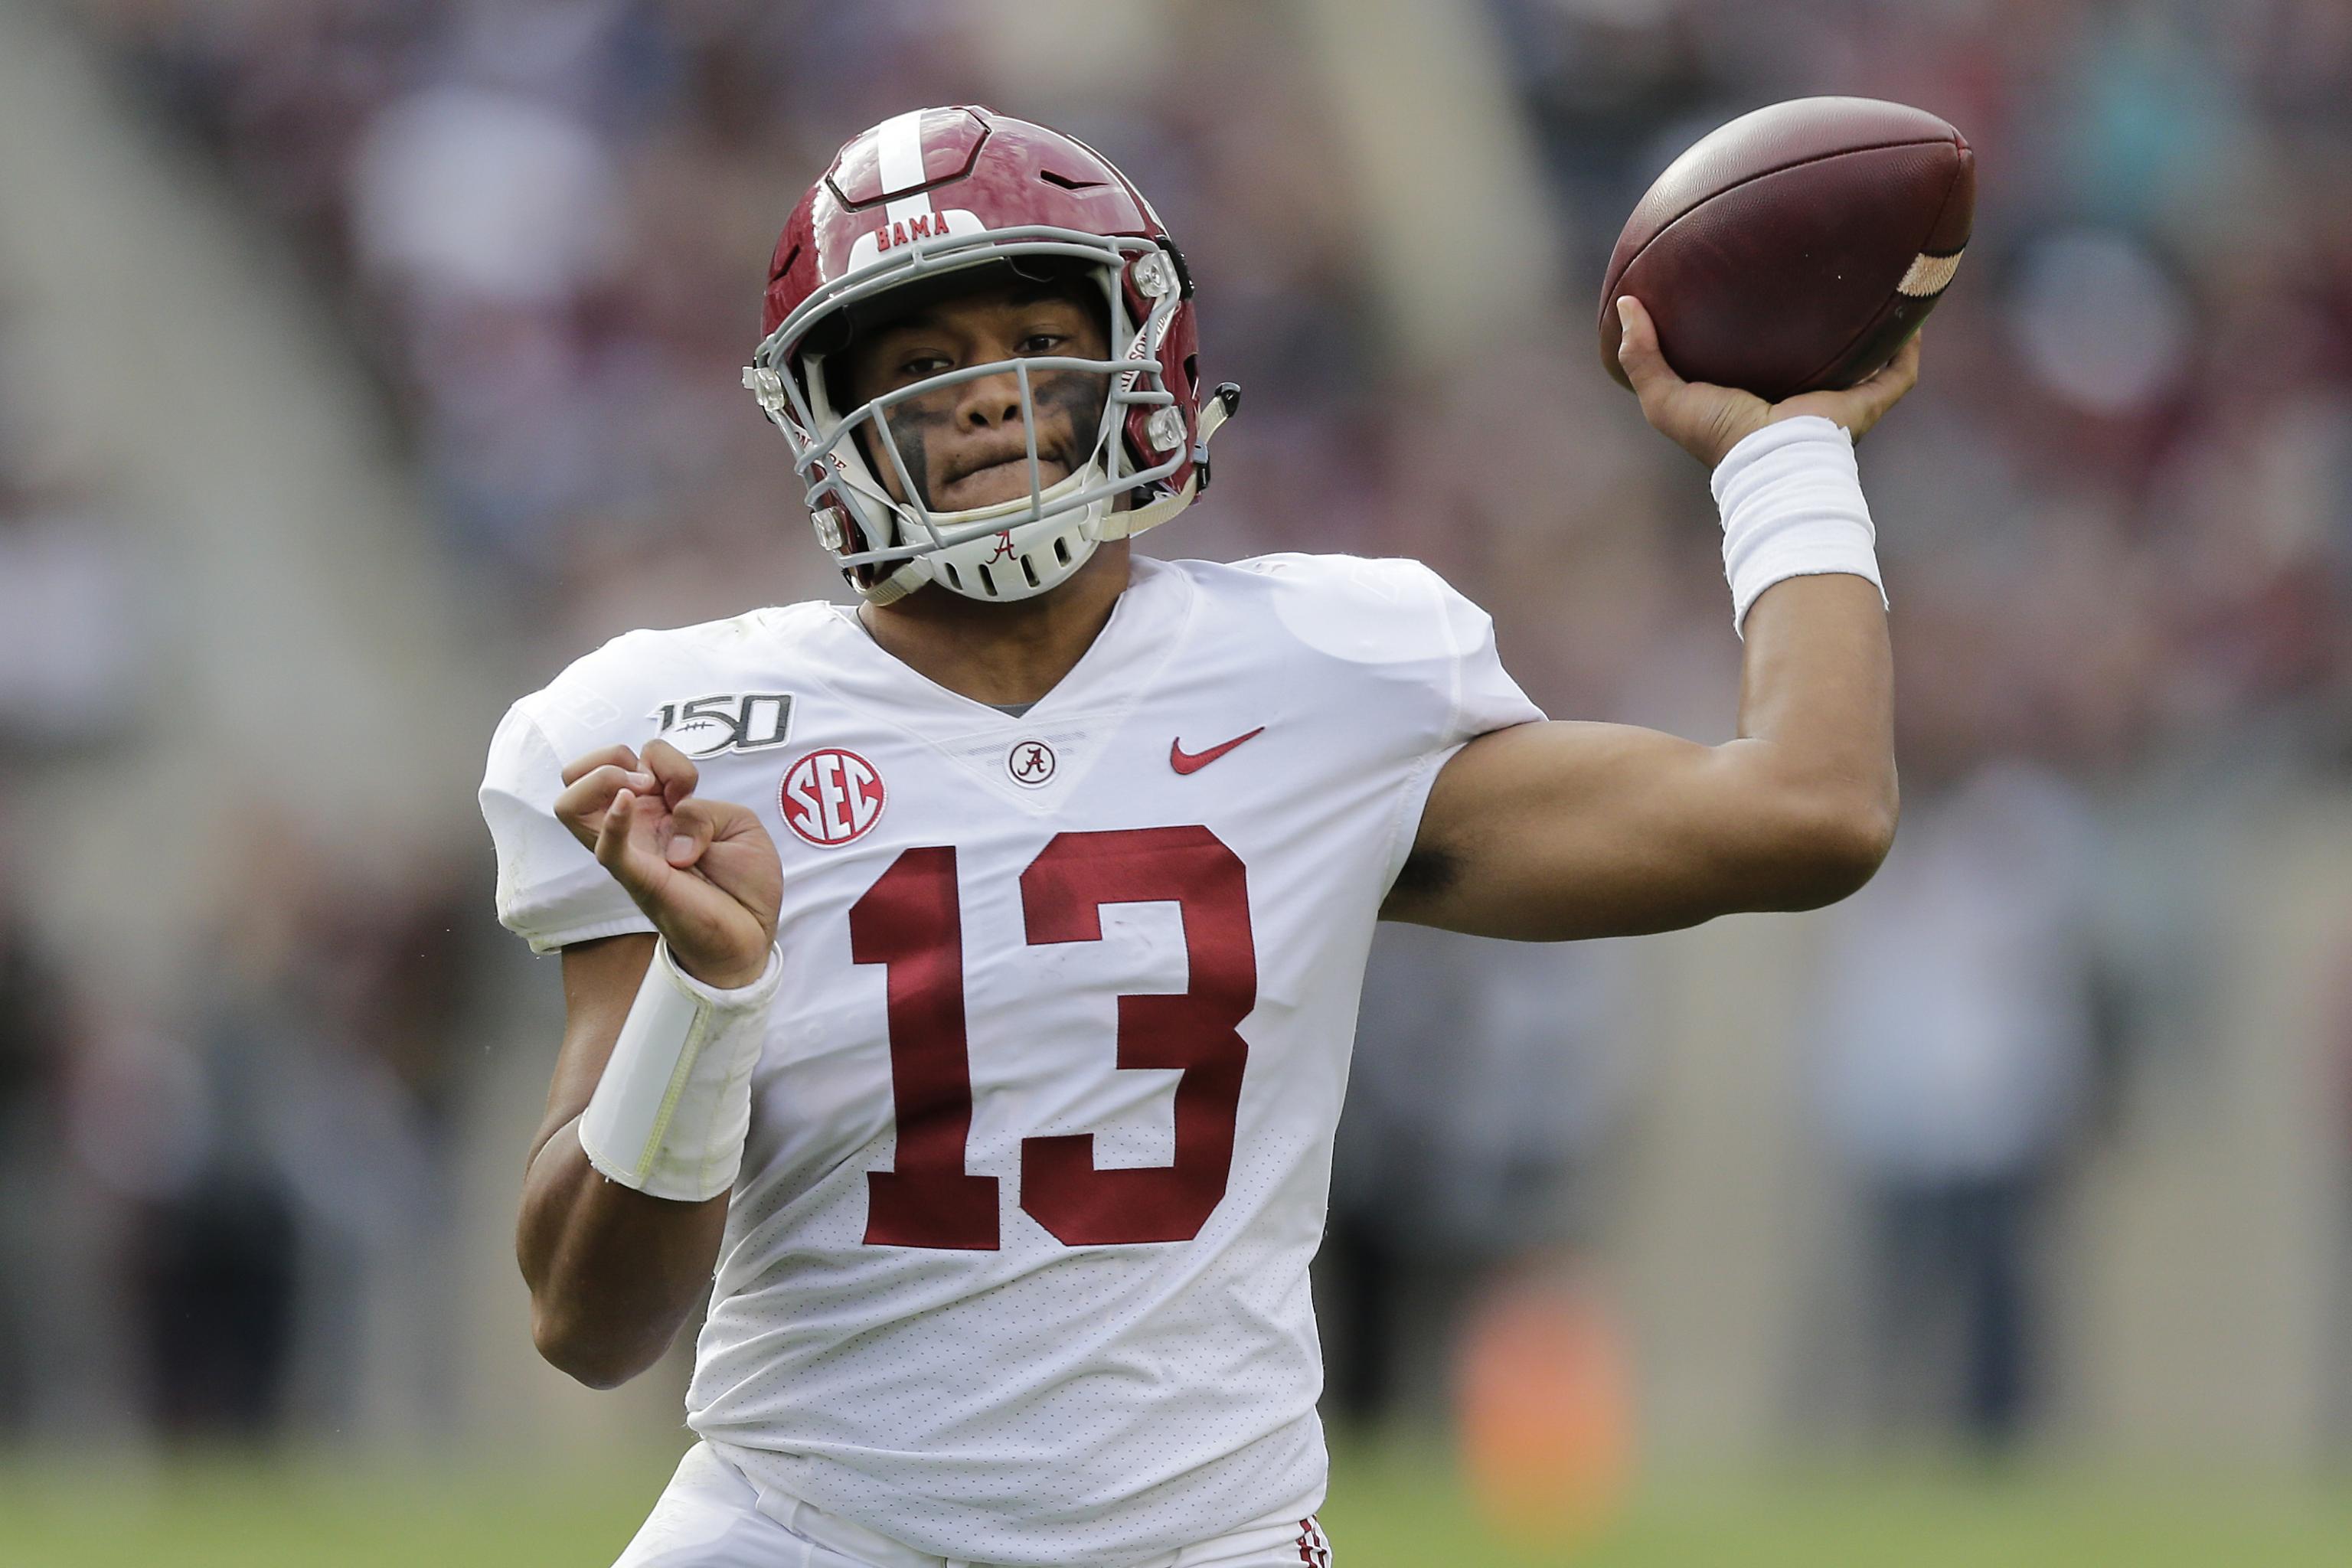 2020 NFL mock draft: How LSU, Alabama can make history in the 1st